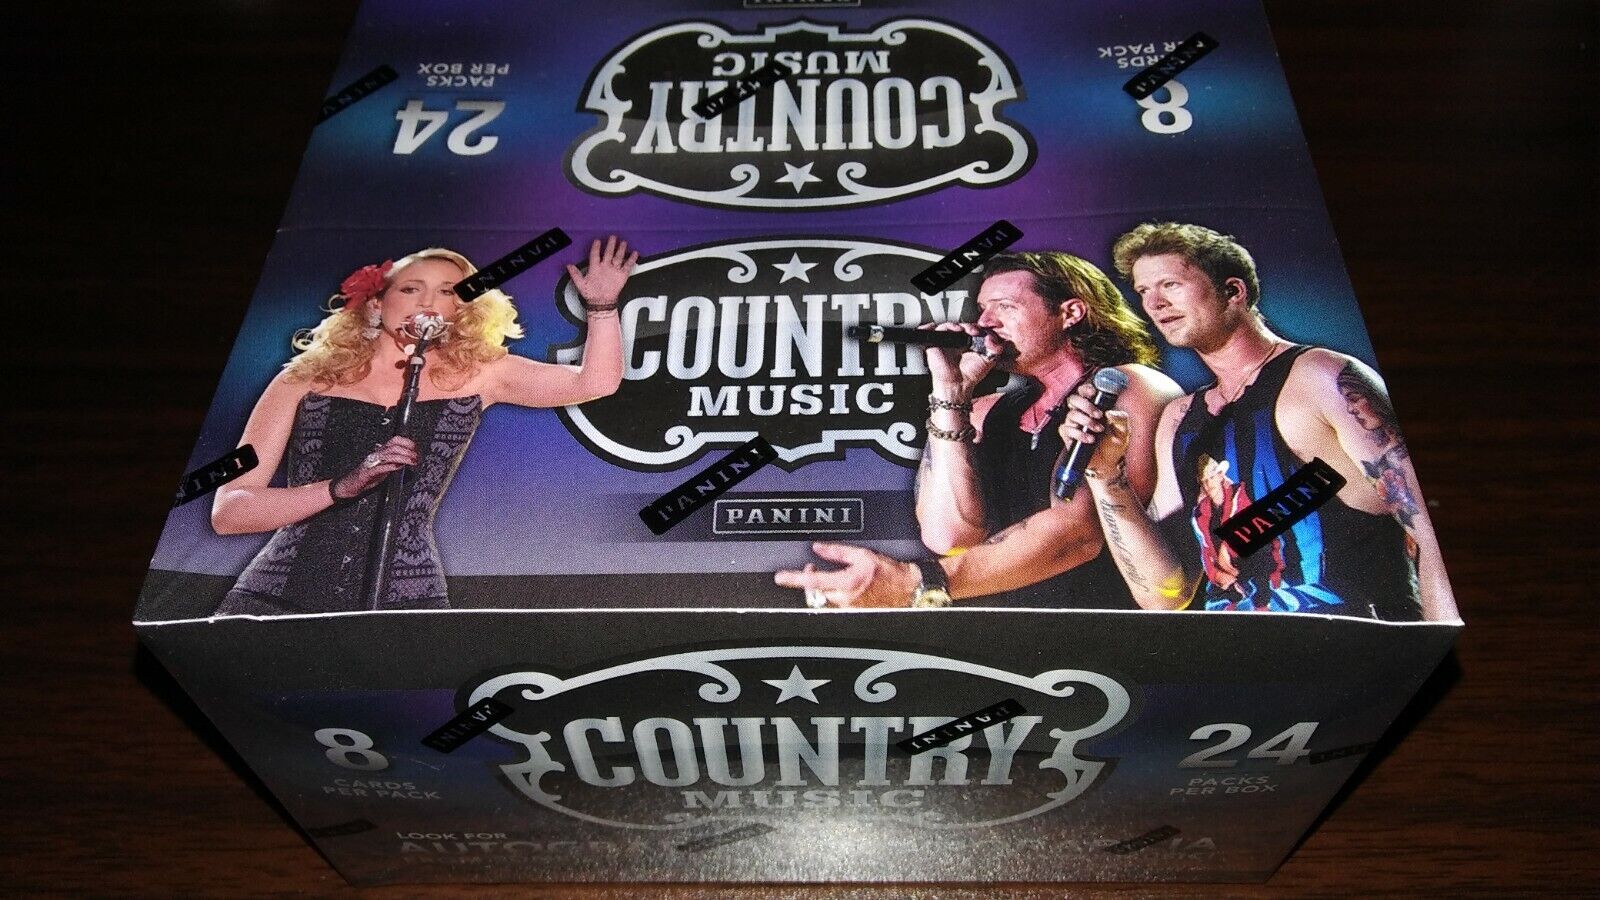 2014 Panini Country Music Factory Sealed Retail Box 24 packs 8 cards per 